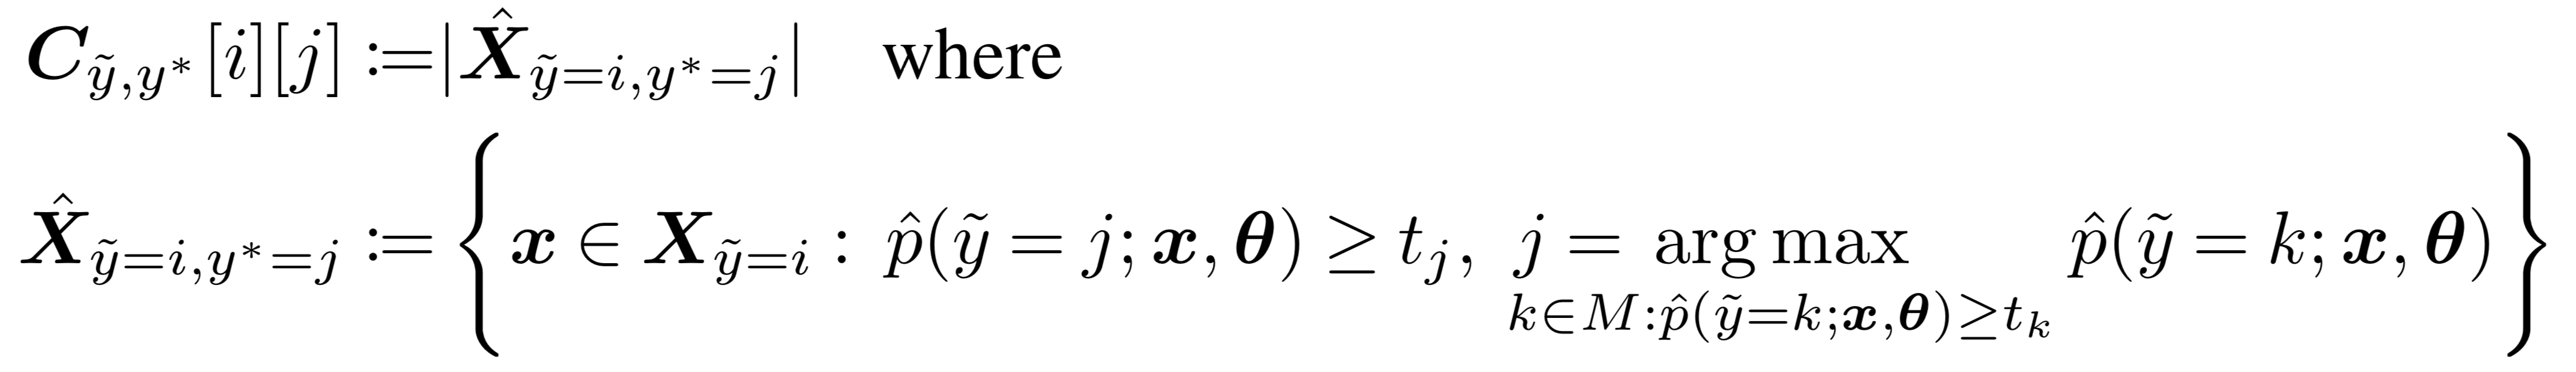 Confident Joint Equation